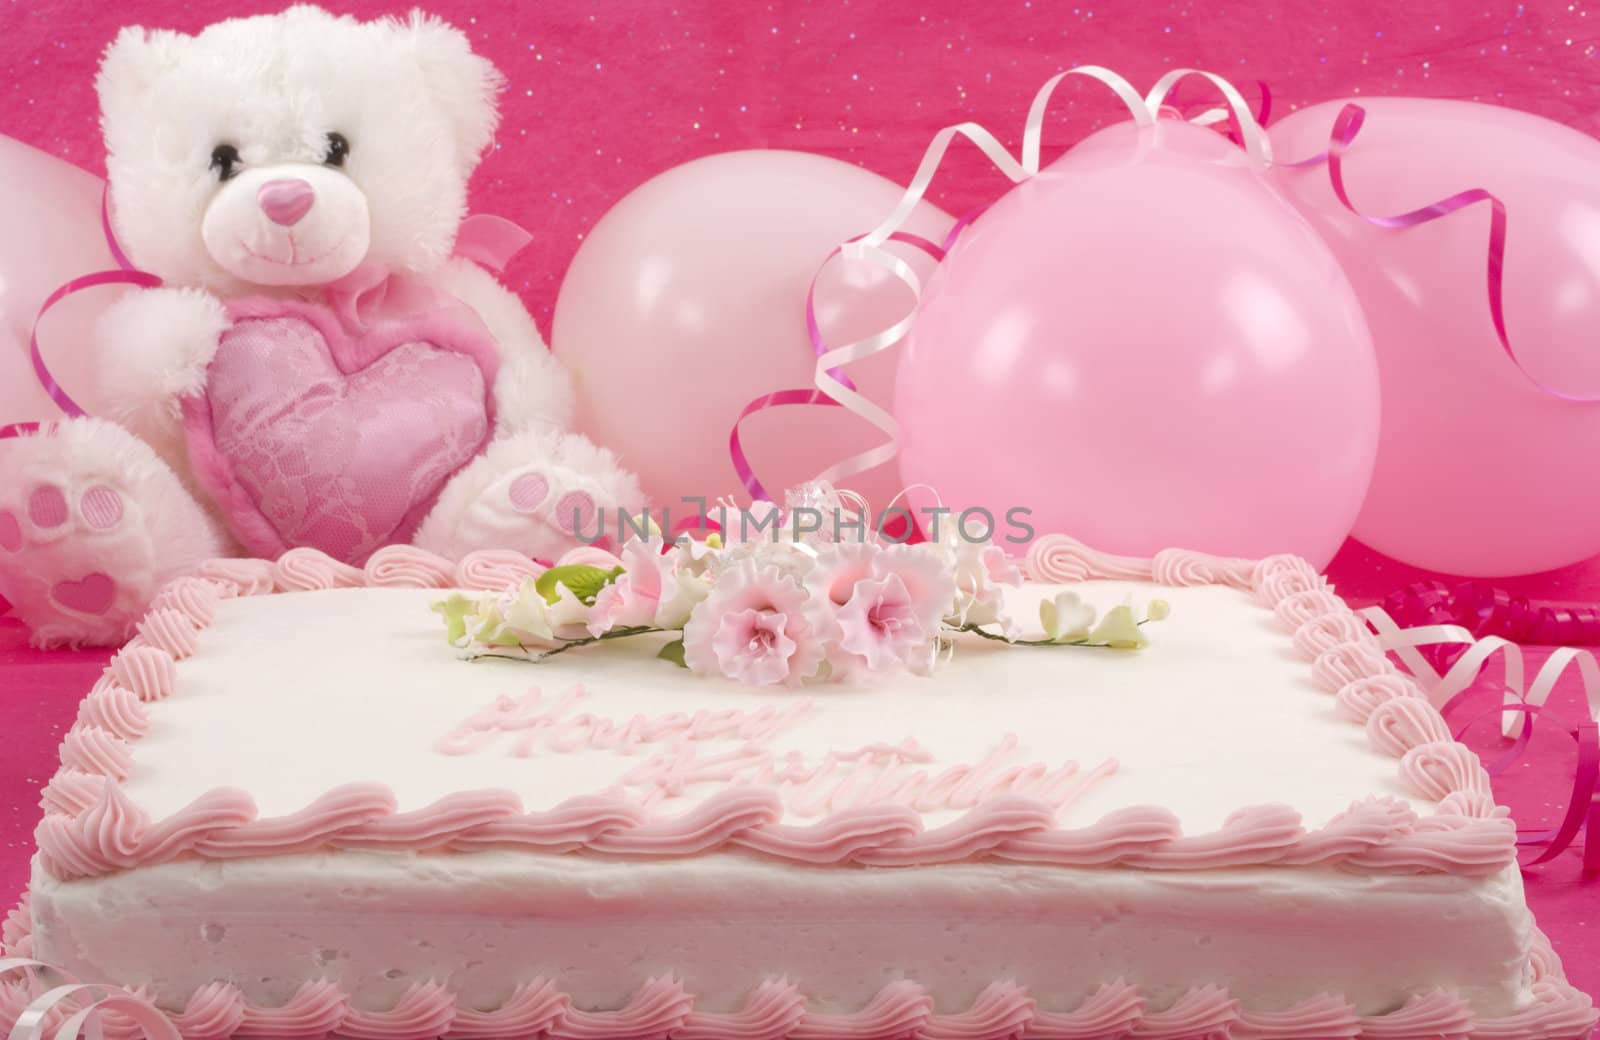 Delicious beautifully decorated bithday cake, teddy bear and balloons